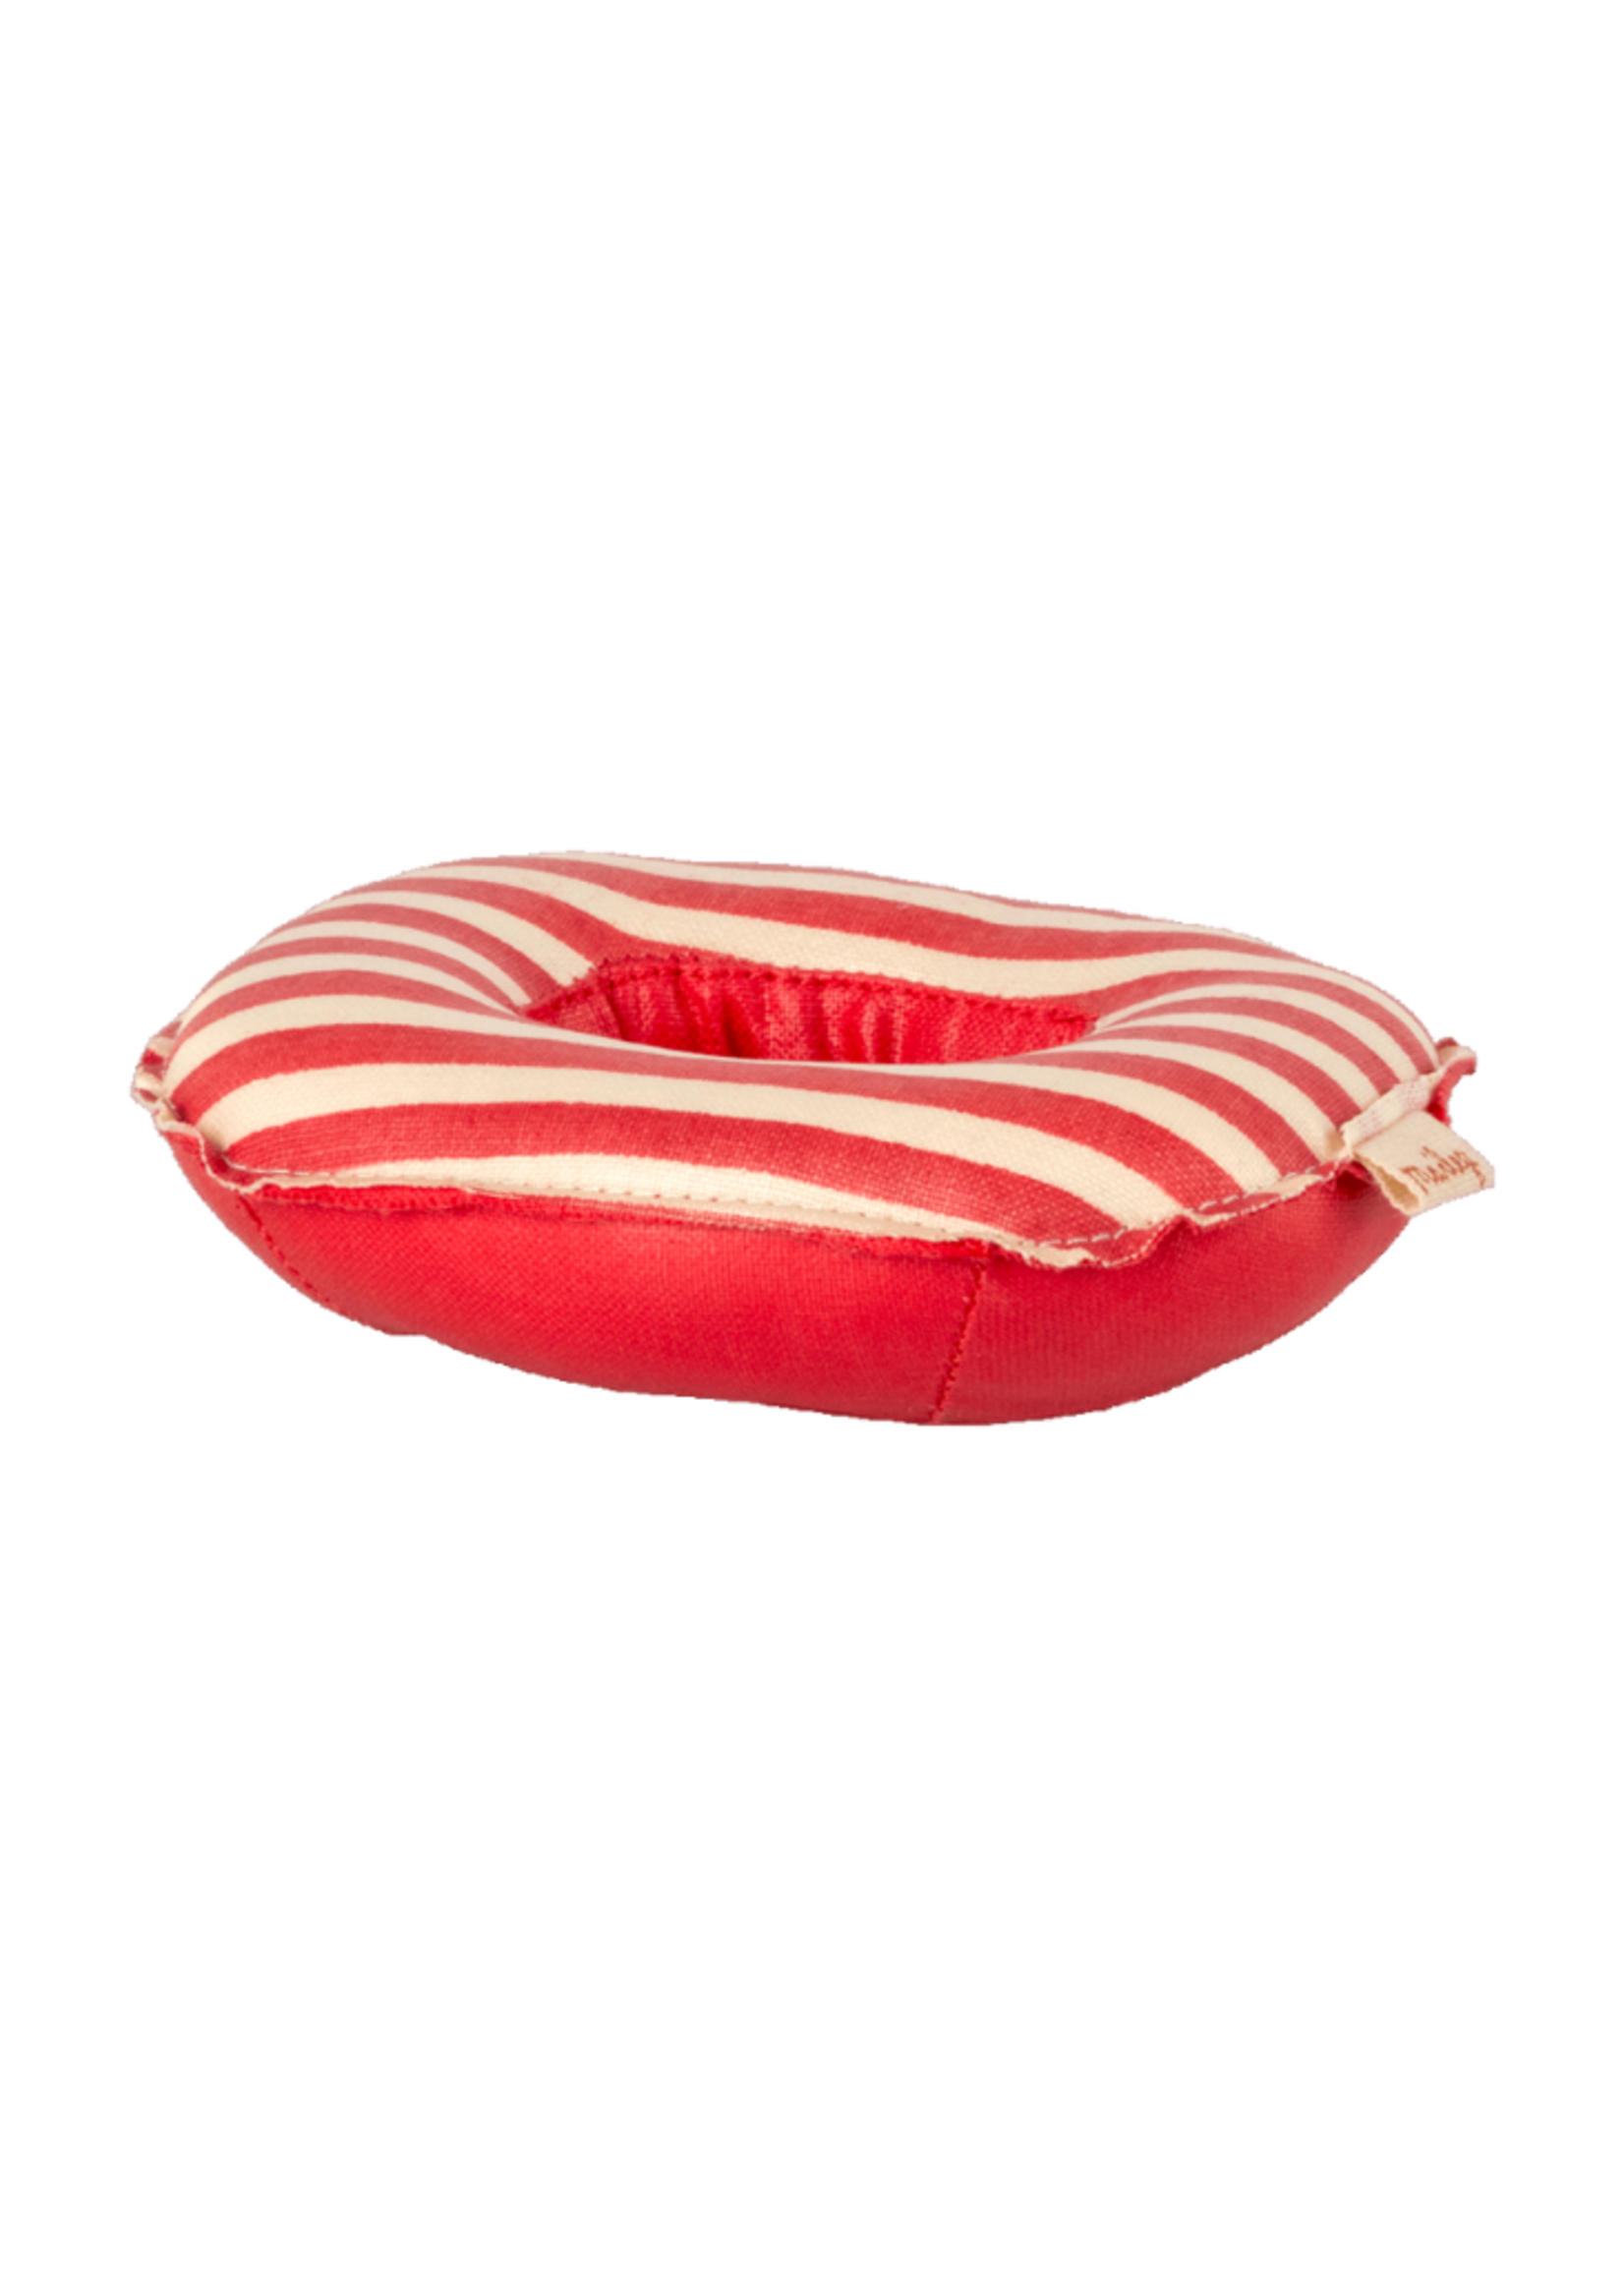 Maileg Rubber Boat, Small Mouse - Red Stripe